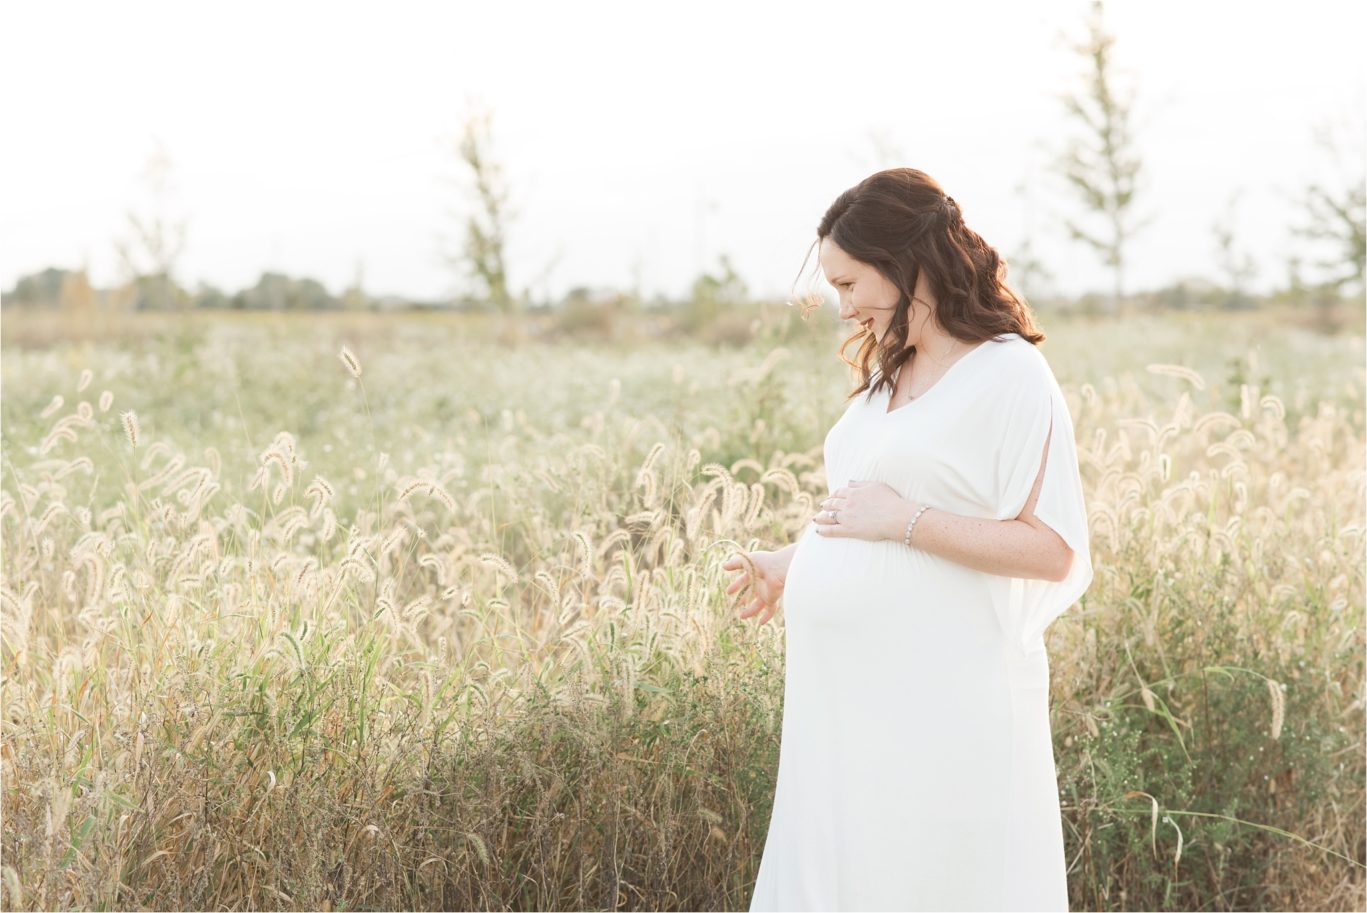 outdoor maternity session in indianapolis at sunset with natural light by lindsay konopa photography